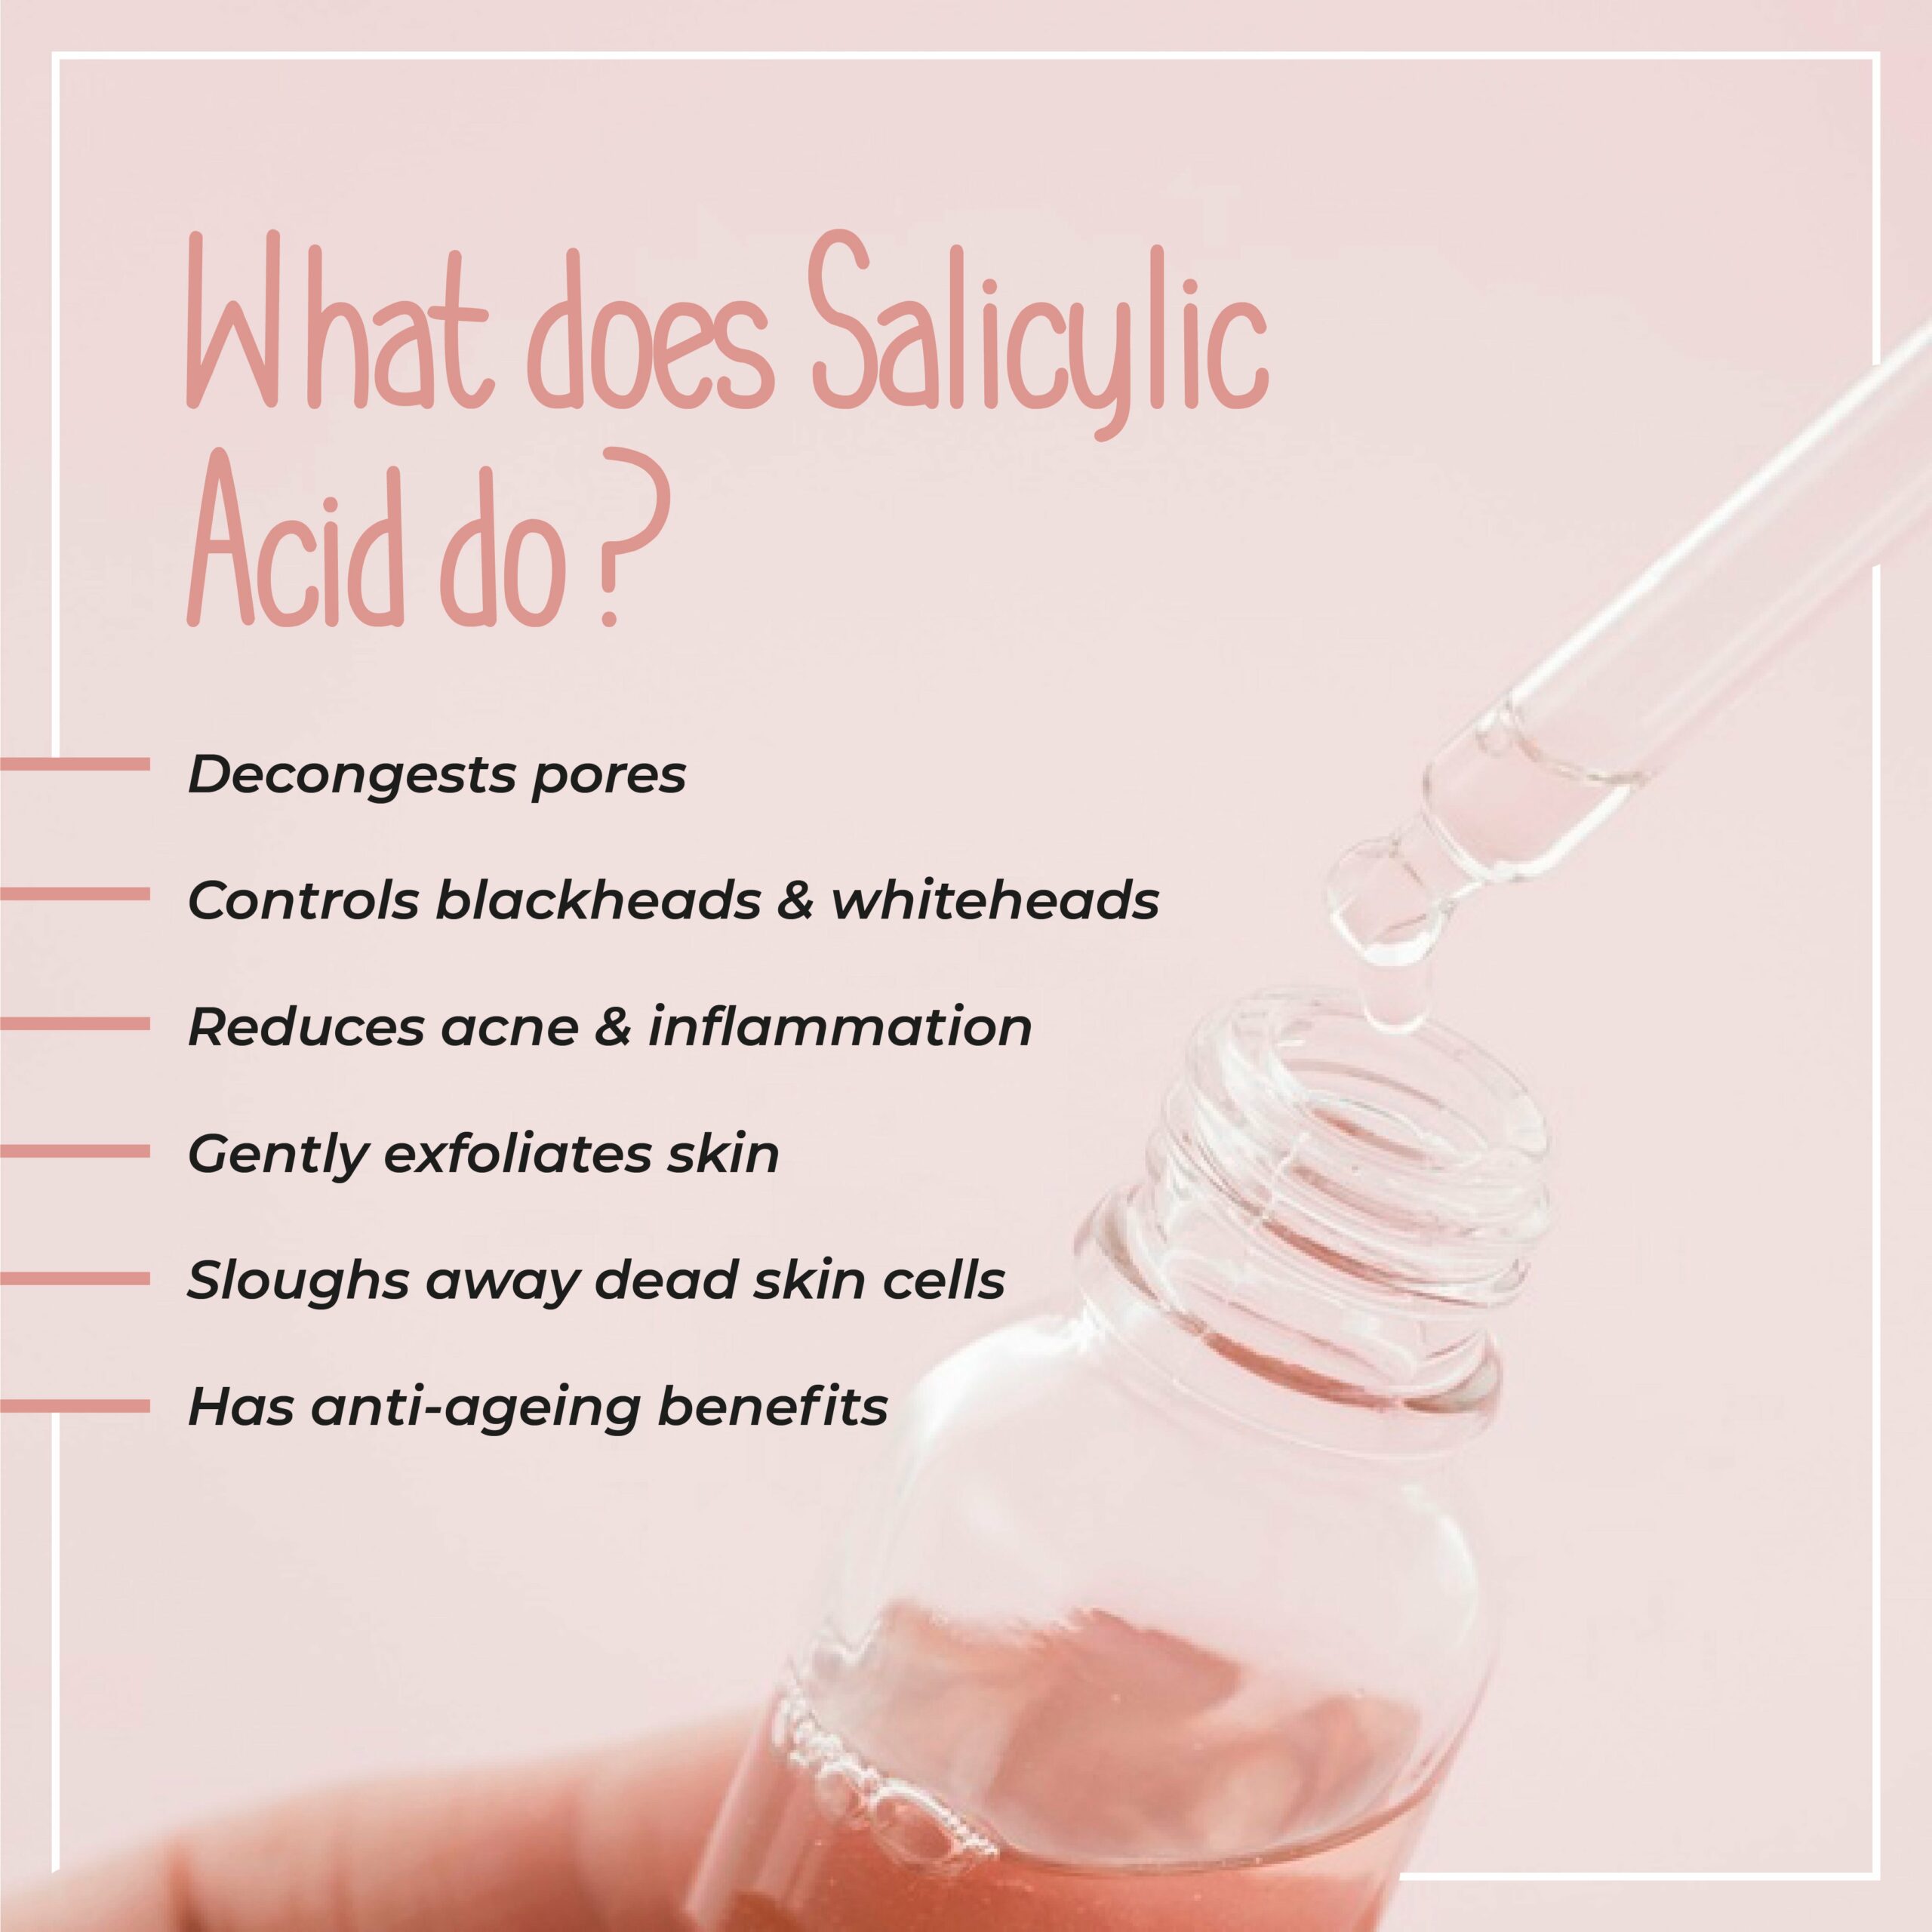 Unlock The Benefits Of Salicylic Acid Cleansers: How Often Should You Use Them?